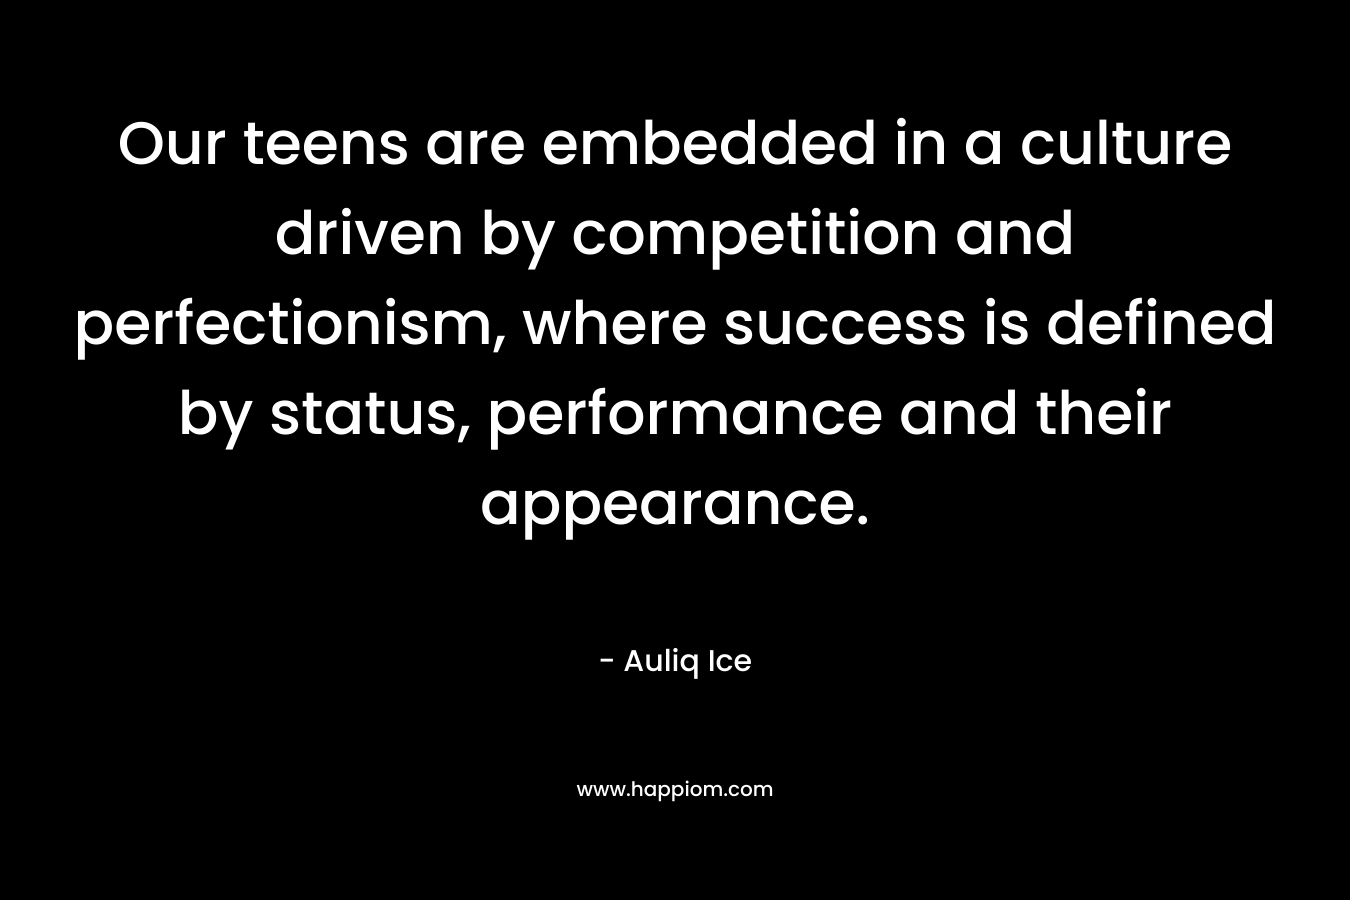 Our teens are embedded in a culture driven by competition and perfectionism, where success is defined by status, performance and their appearance. – Auliq Ice